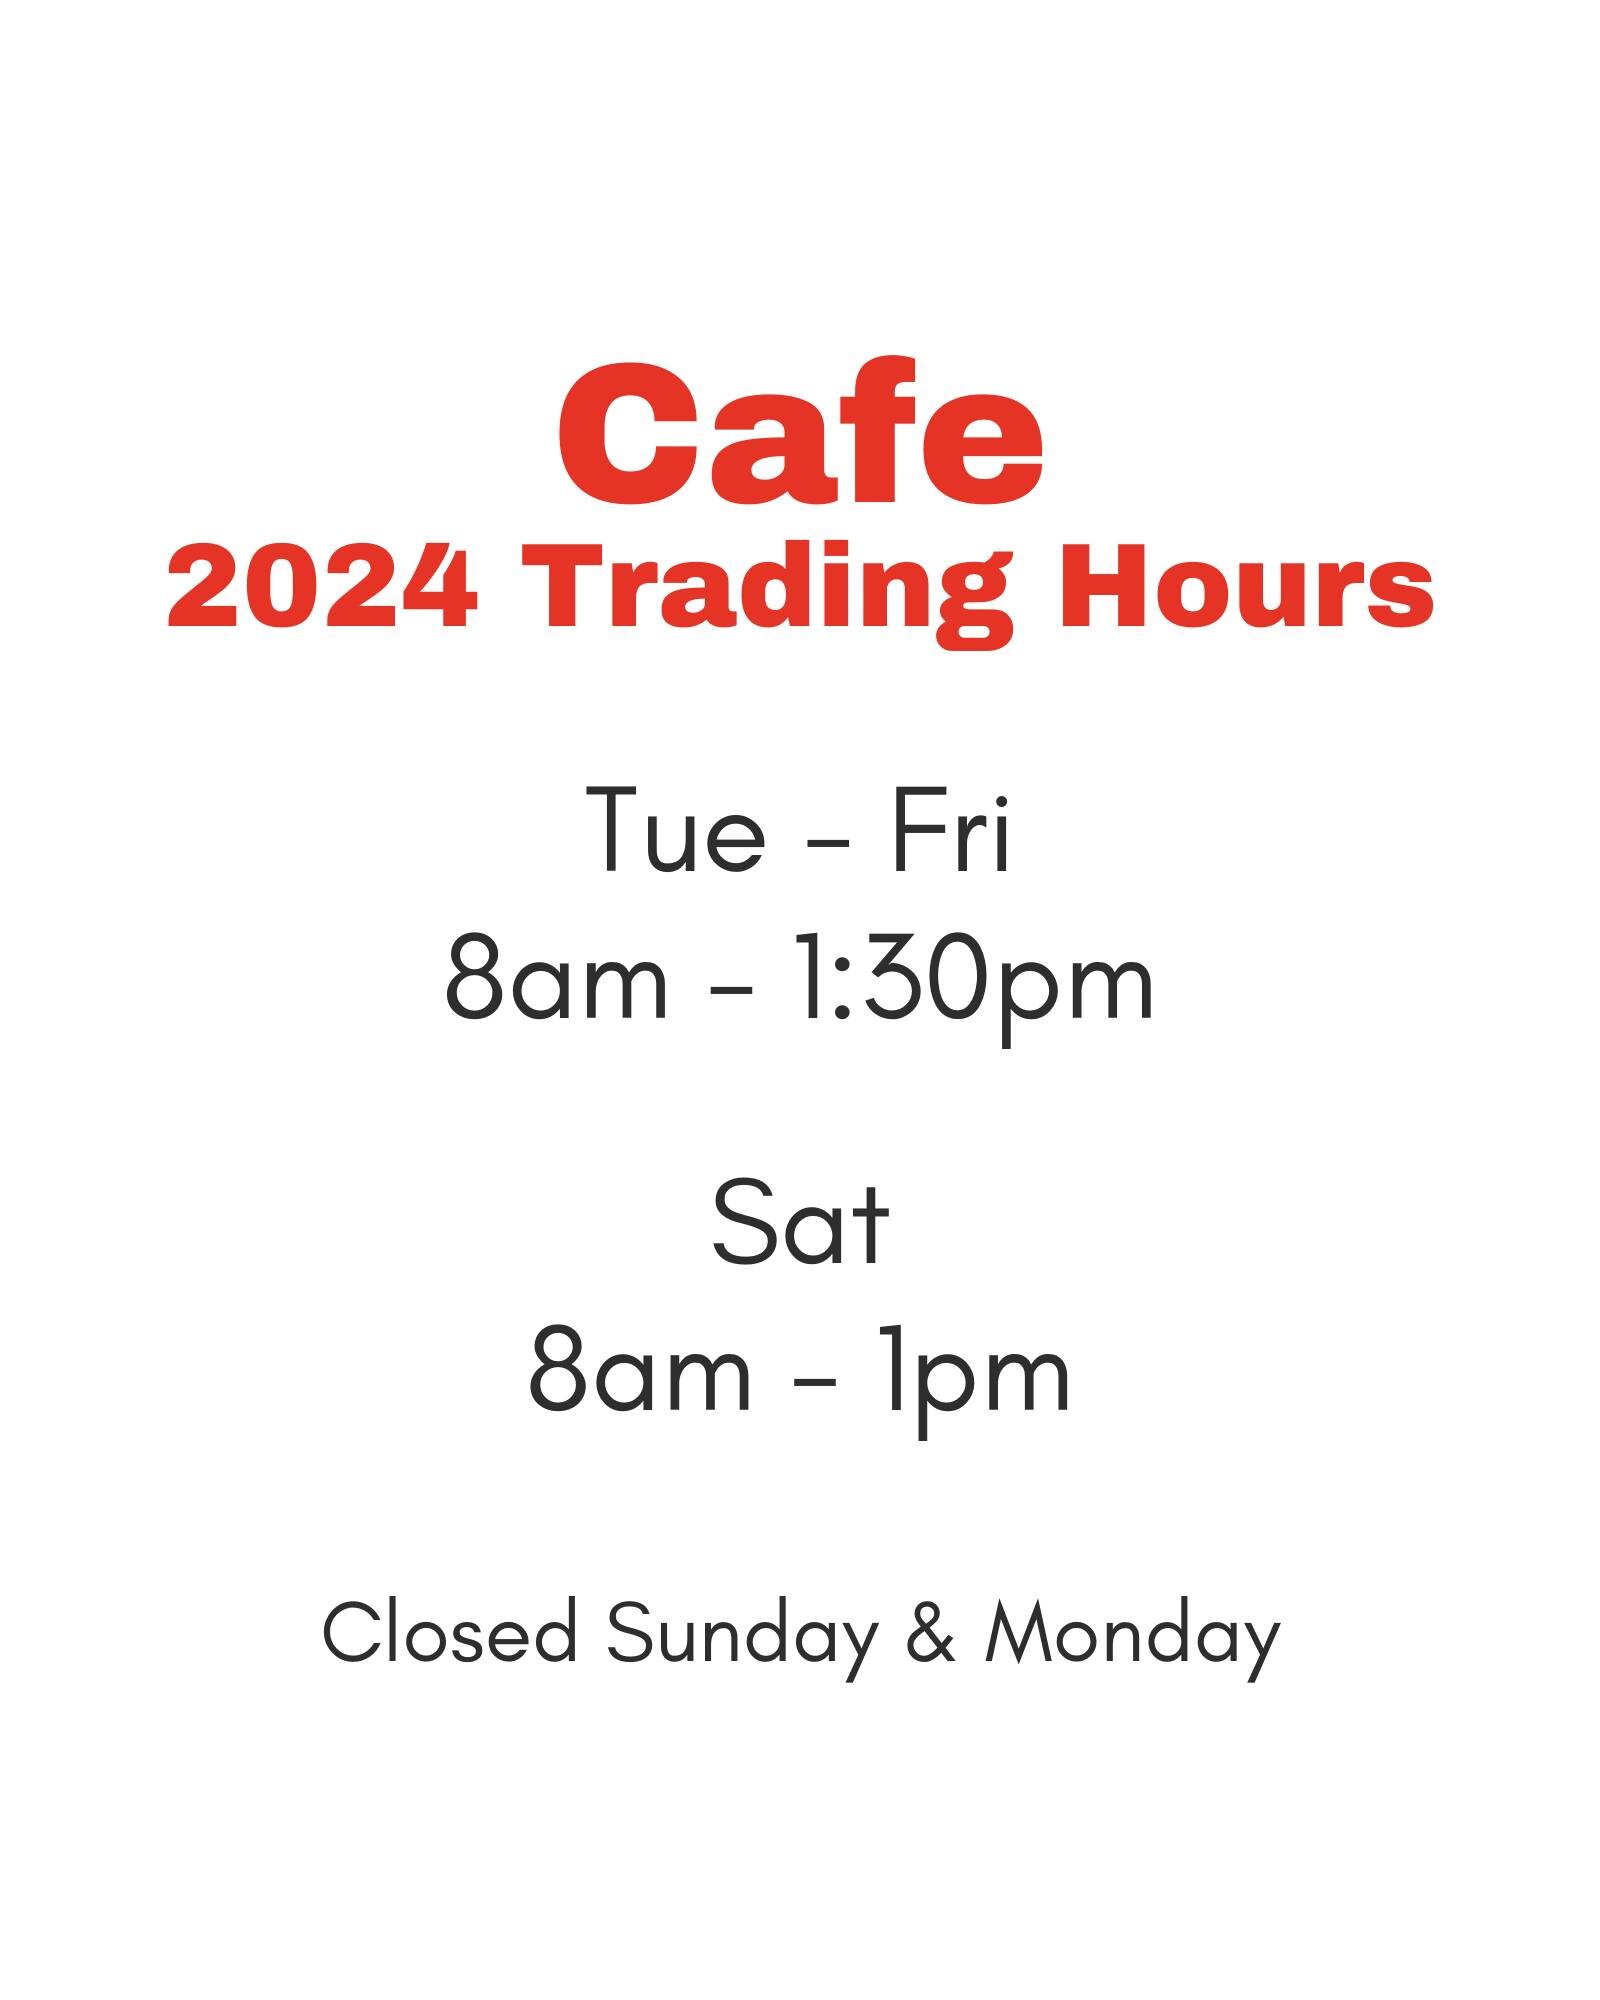 Here is this year's updated trading hours! See you very soon!